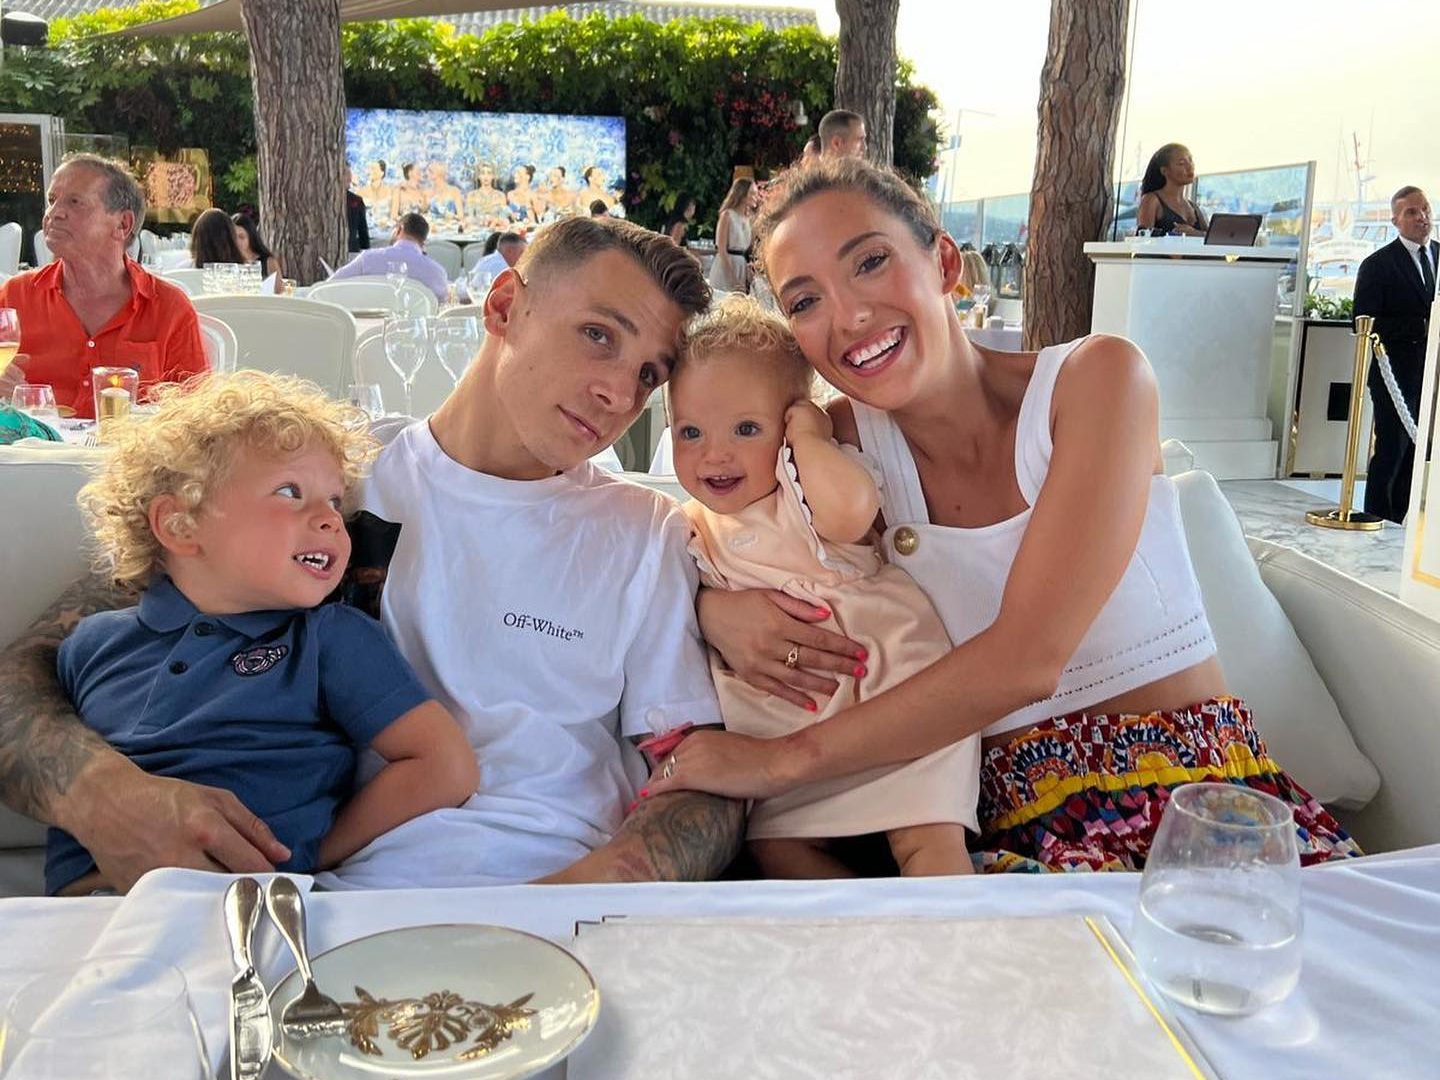 Lucas Digne with his wife and children. (Credit: Instagram)